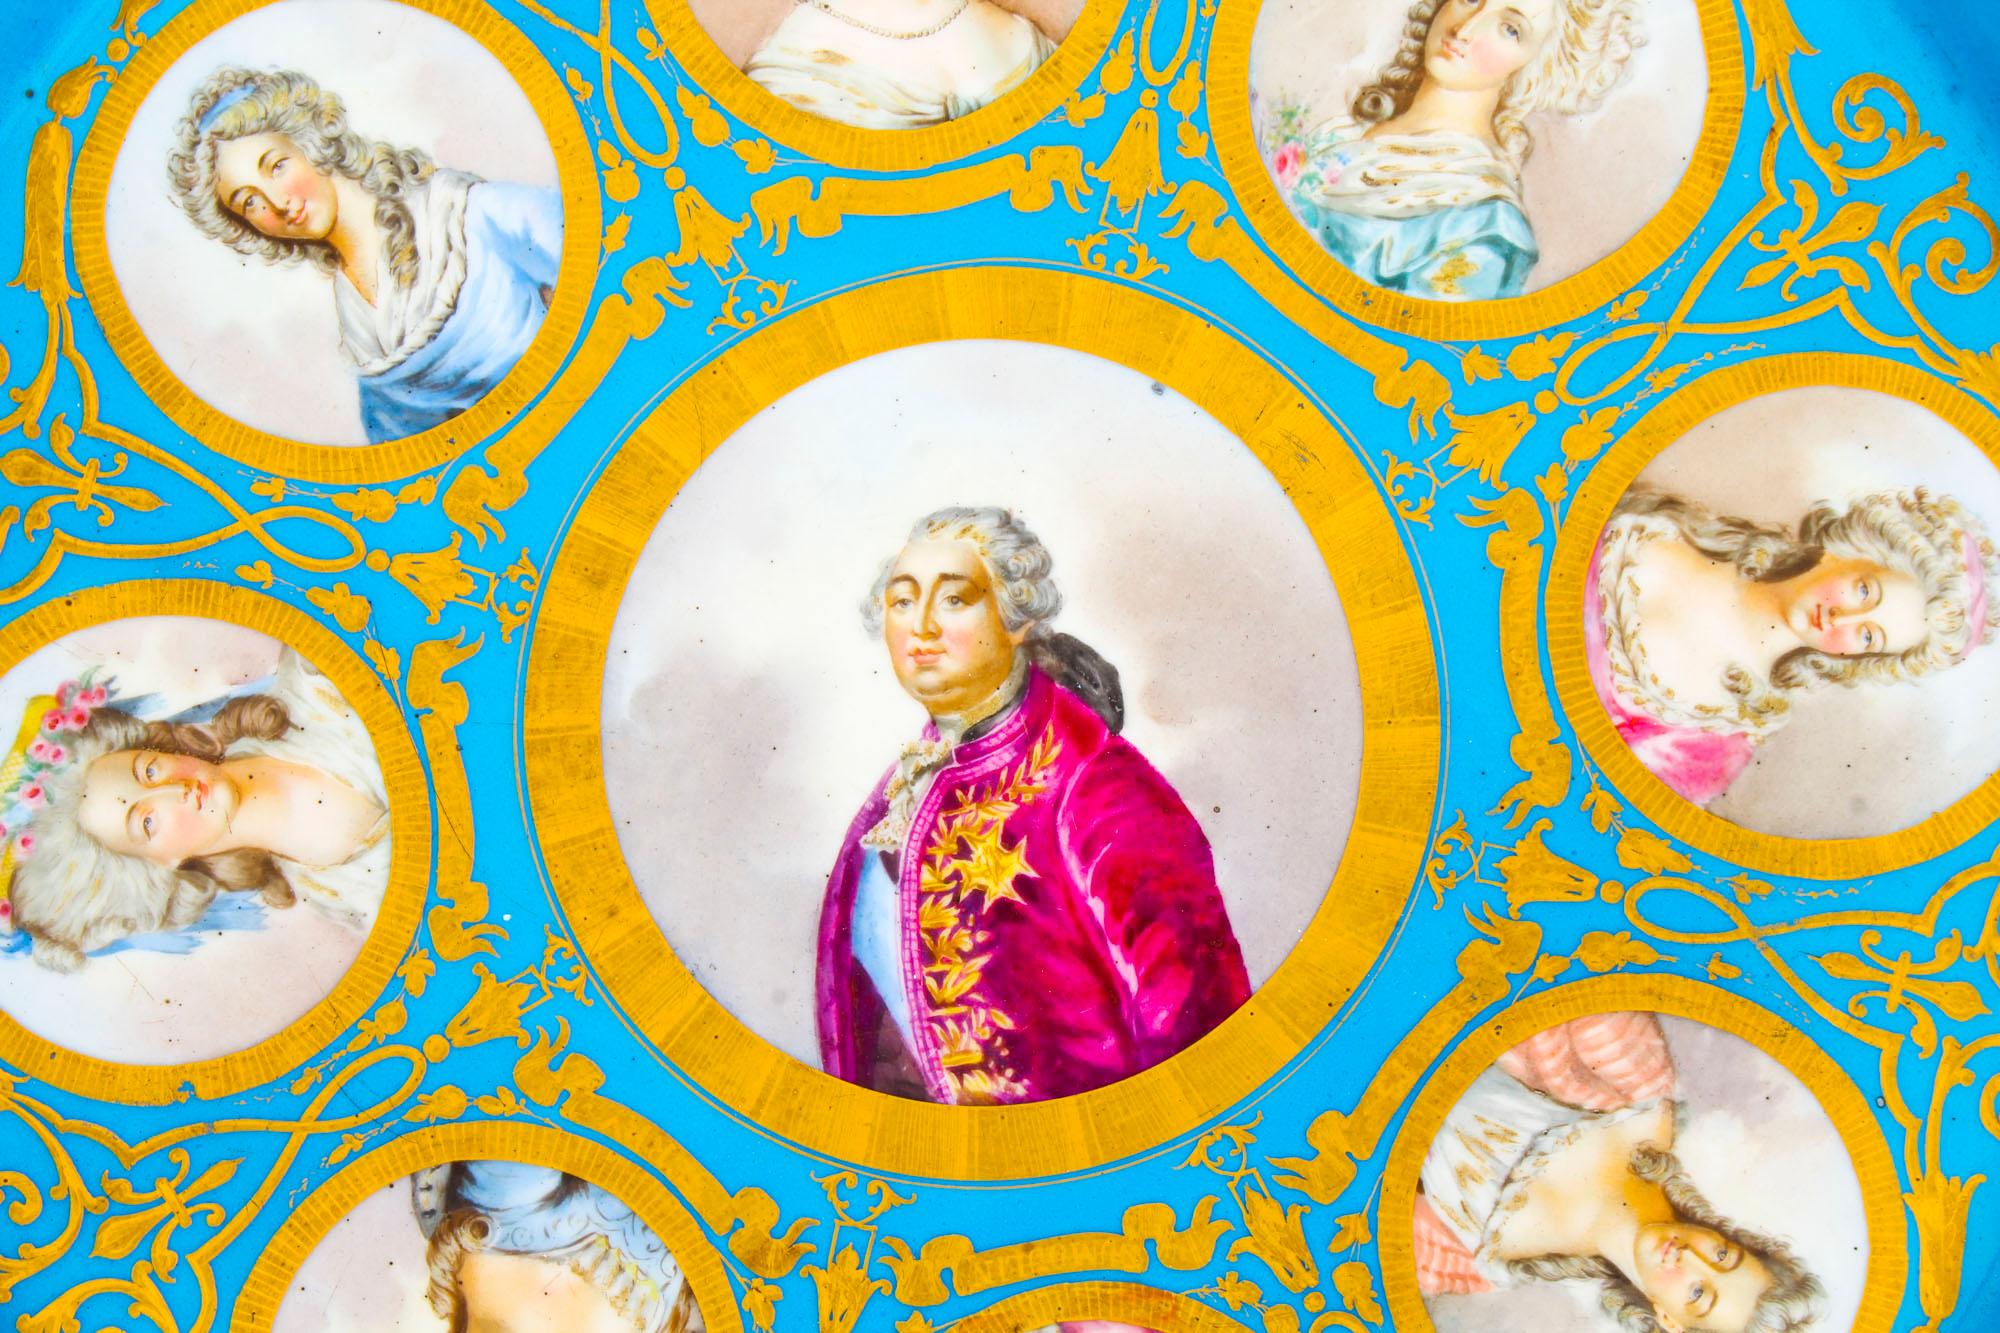 This is an important large decorative antique French ormolu-mounted Sevres porcelain charger featuring portaits of Louis XVI and important members of his court, the rear with Sevres mark for 1790.
 
It has a striking Bleu Celeste and gilt tooled